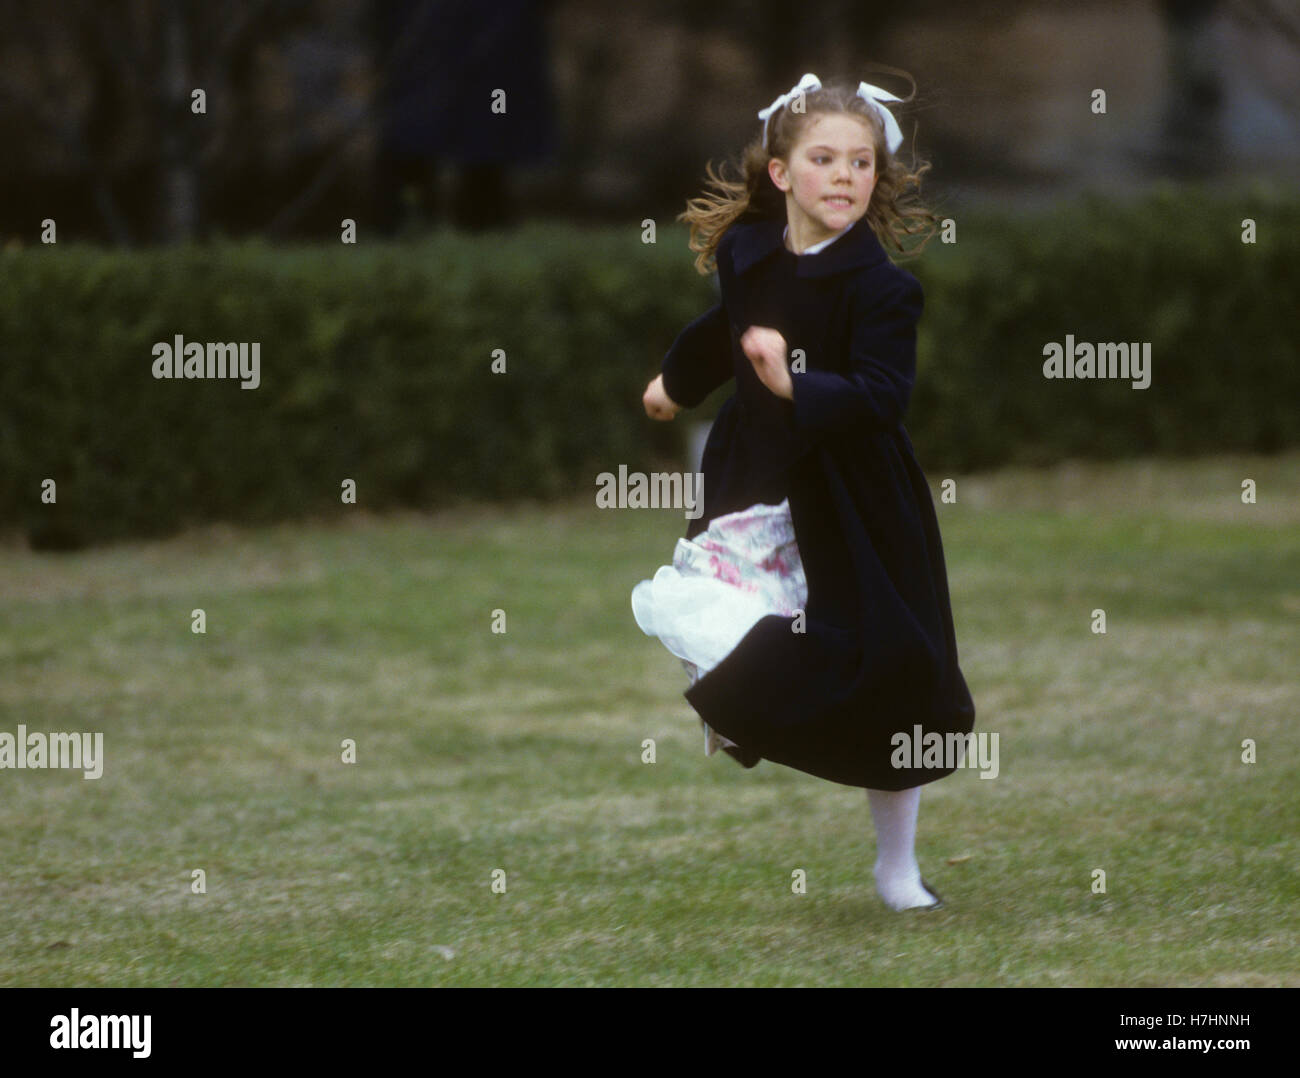 crown-princess-victoria-play-in-the-park-at-drottningholm-1986-H7HNNH.jpg